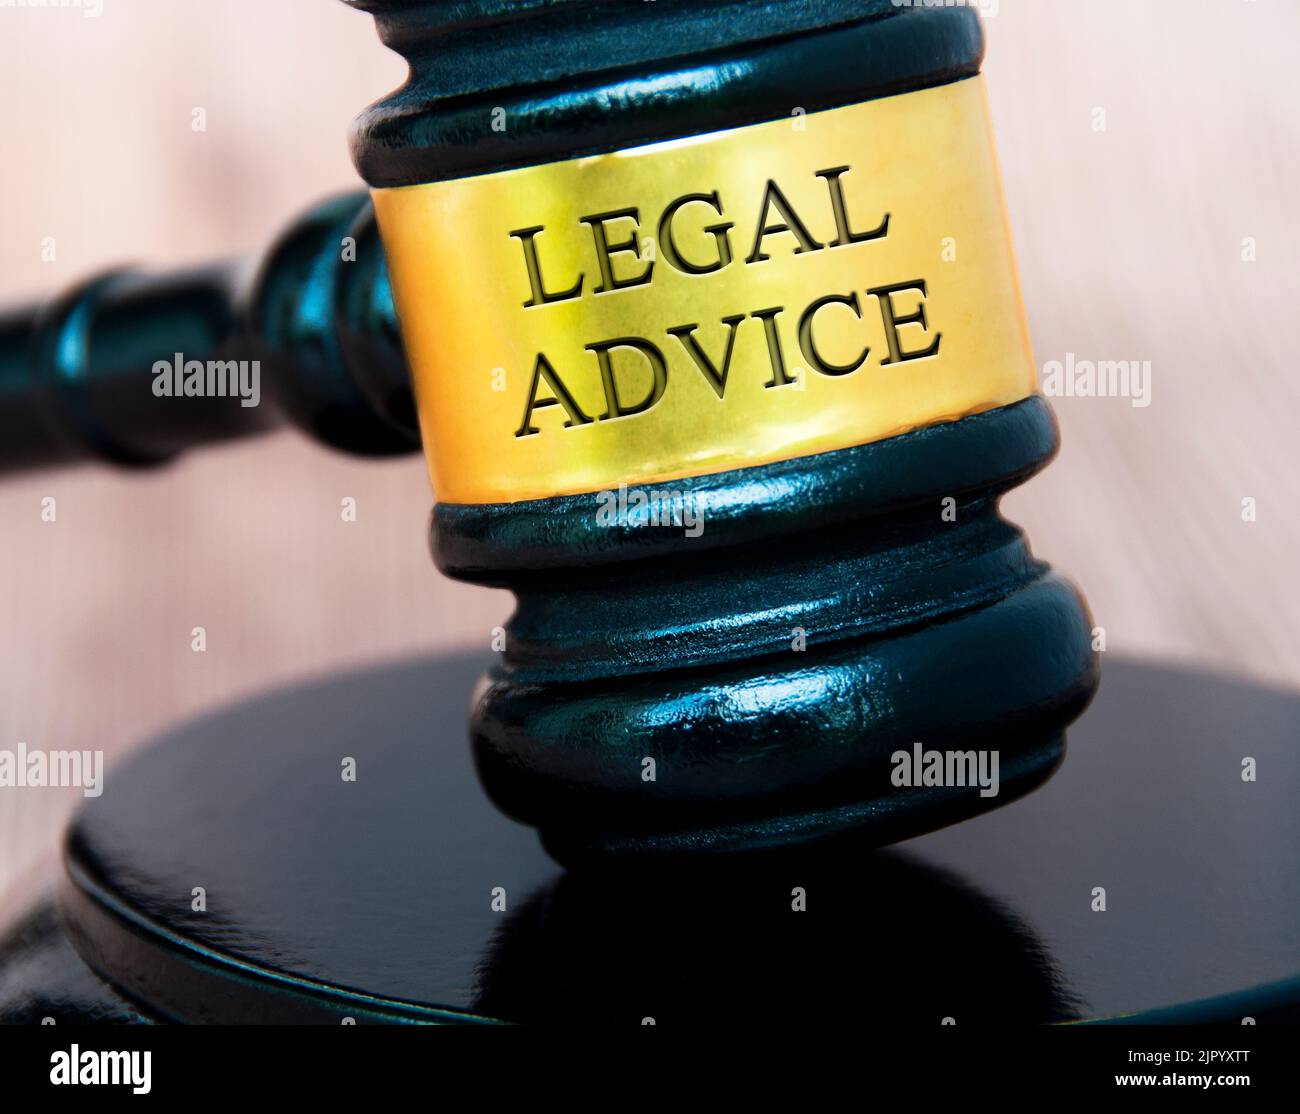 Legal advice text engraved on lawyer gavel with blurred wooden background. Legal and law concept. Stock Photo